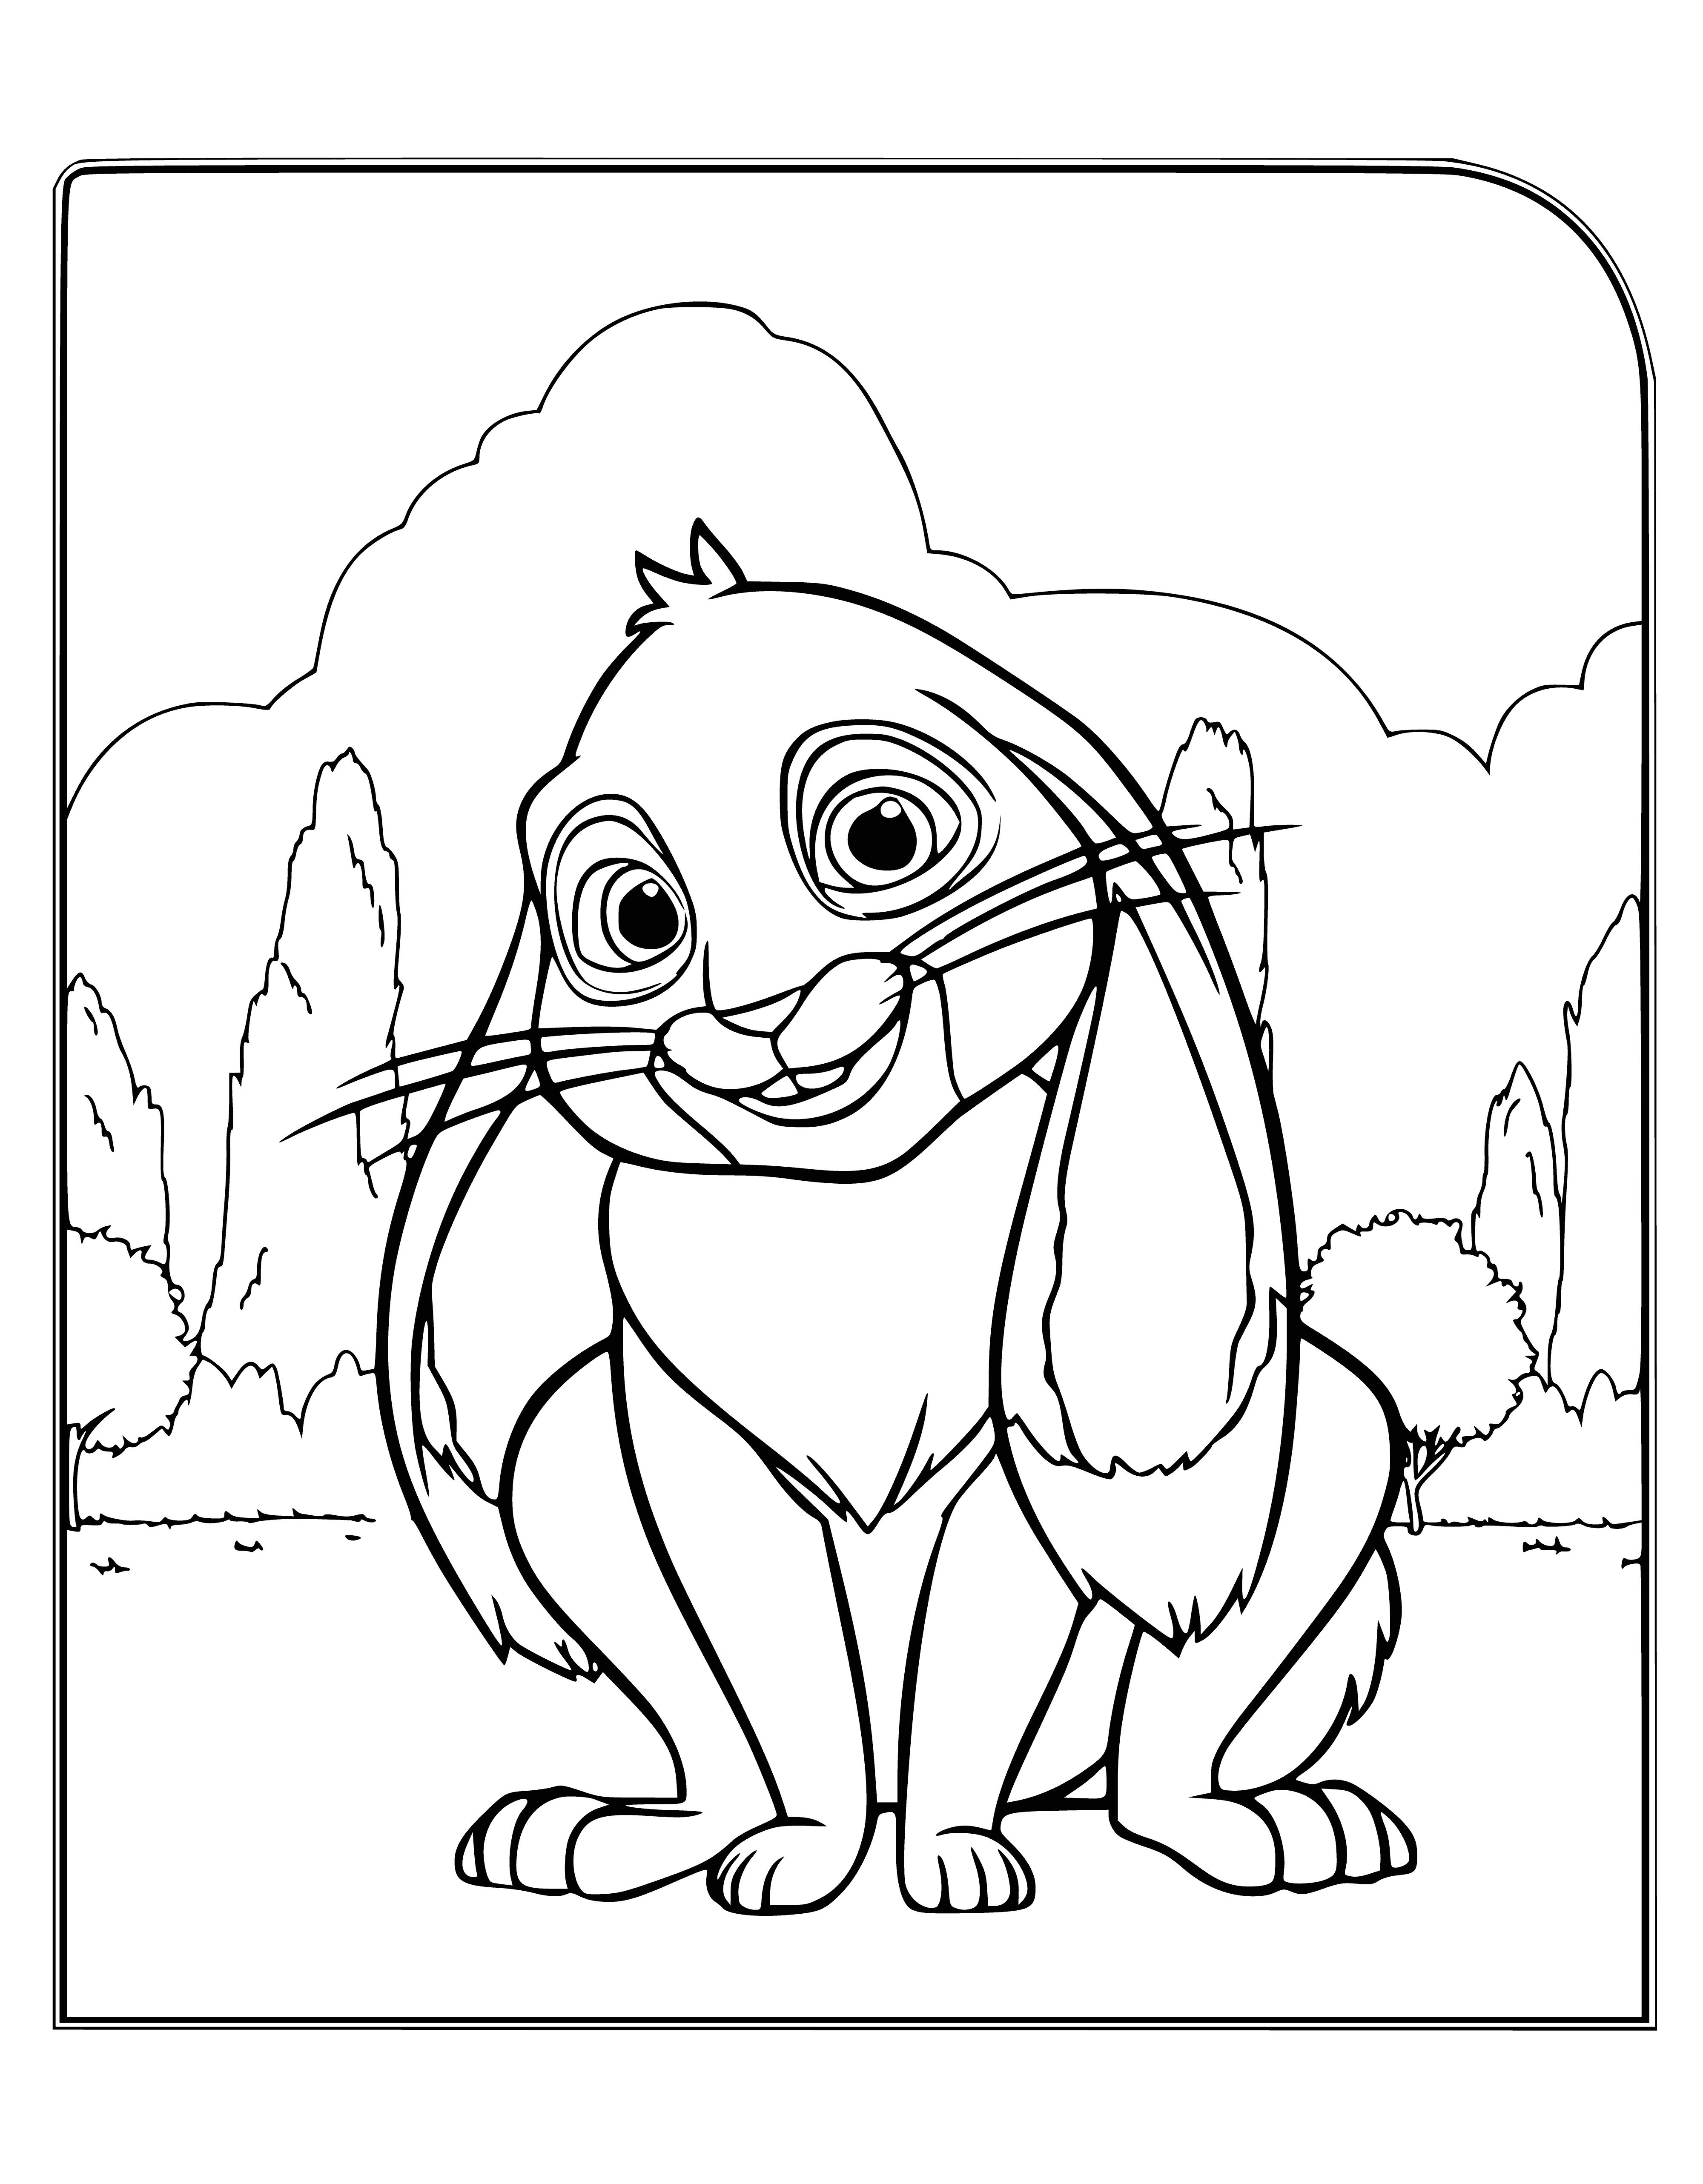 coloring page: White rabbit with blue/purple collar and bow tie stands on hind legs, cute blue eyes and long ears.